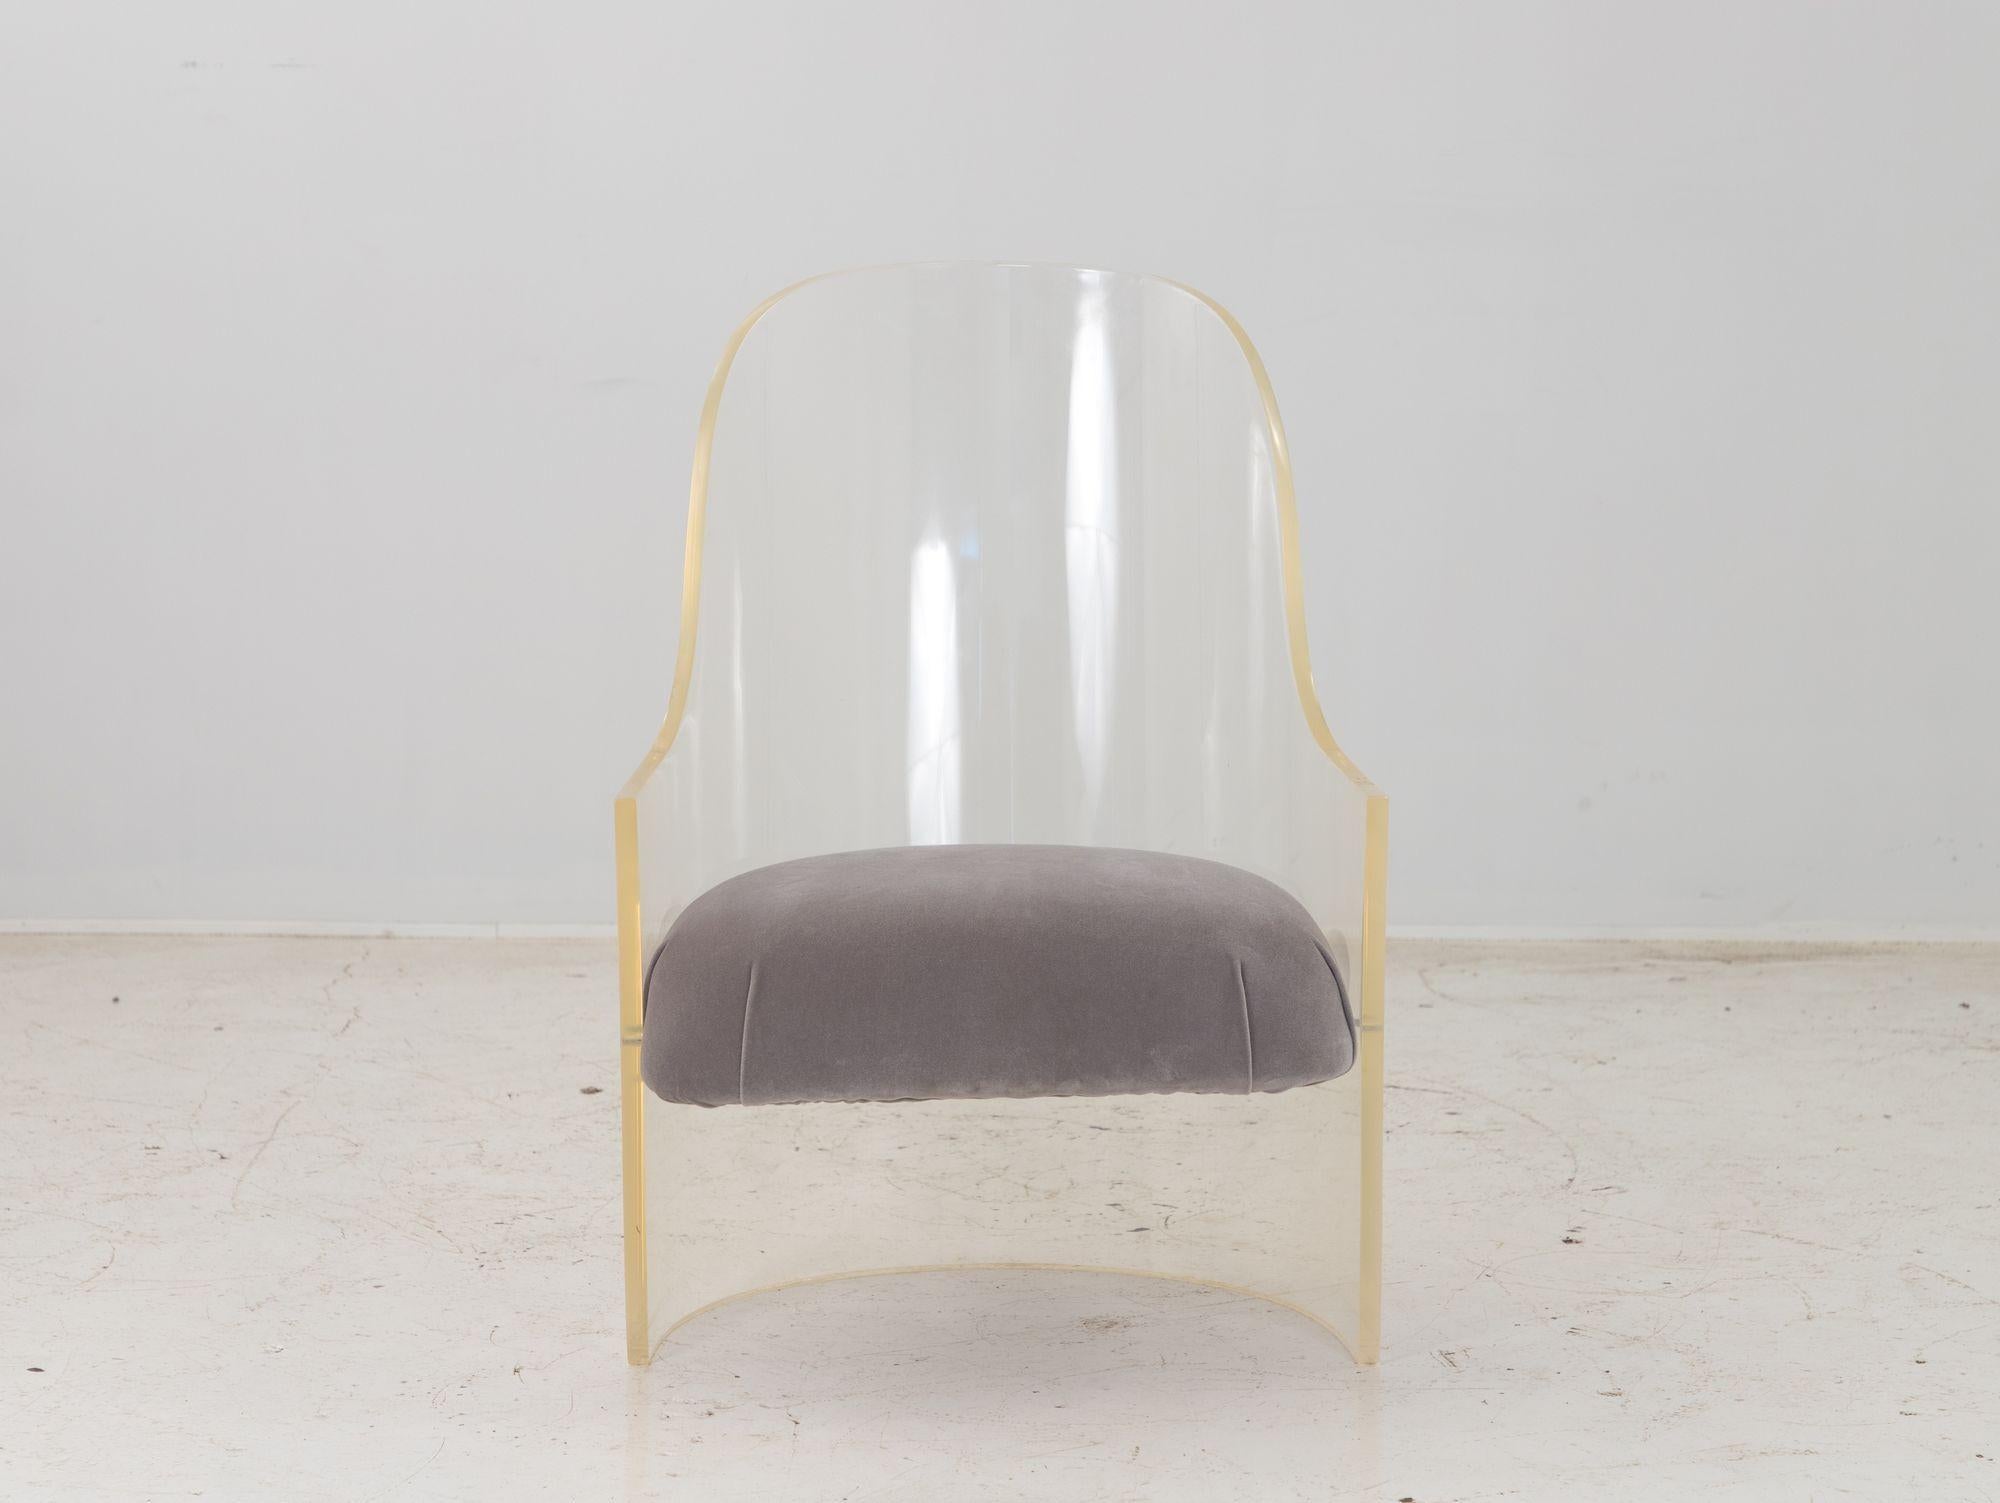 A 1970s lucite barrel back chair reupholstered in gray velvet. This chair is heavy for its size. Some wear to the lucite including a few scratches. Wear consistent with age and use. Measure: 16